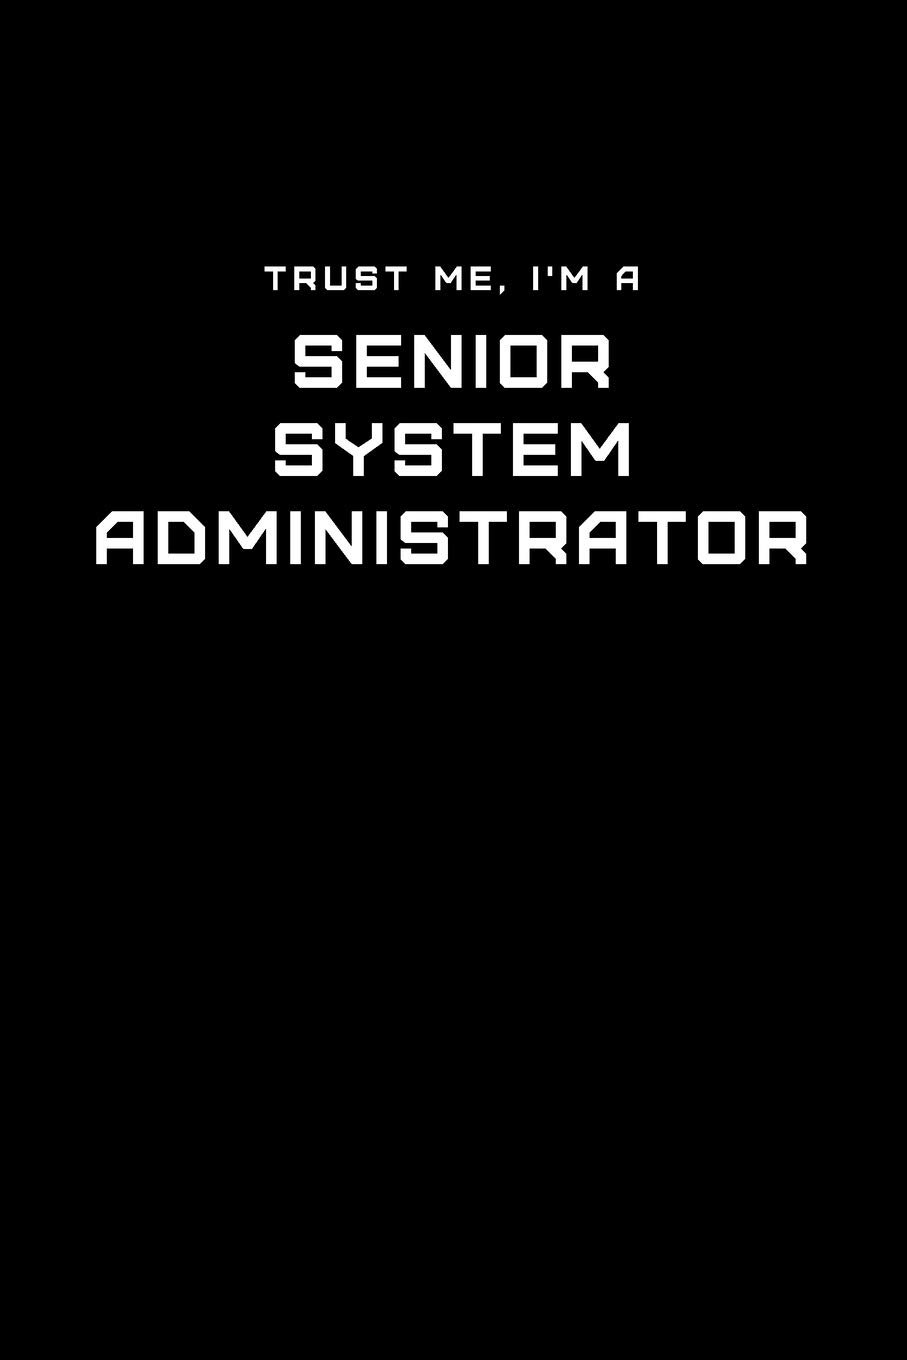 Trust Me, I'm a Senior System Administrator: Dot Grid Notebook x 9 inches, 110 Pages, Professional IT, Office Softcover Journal: 9781686281198: Notebooks, IT: Books